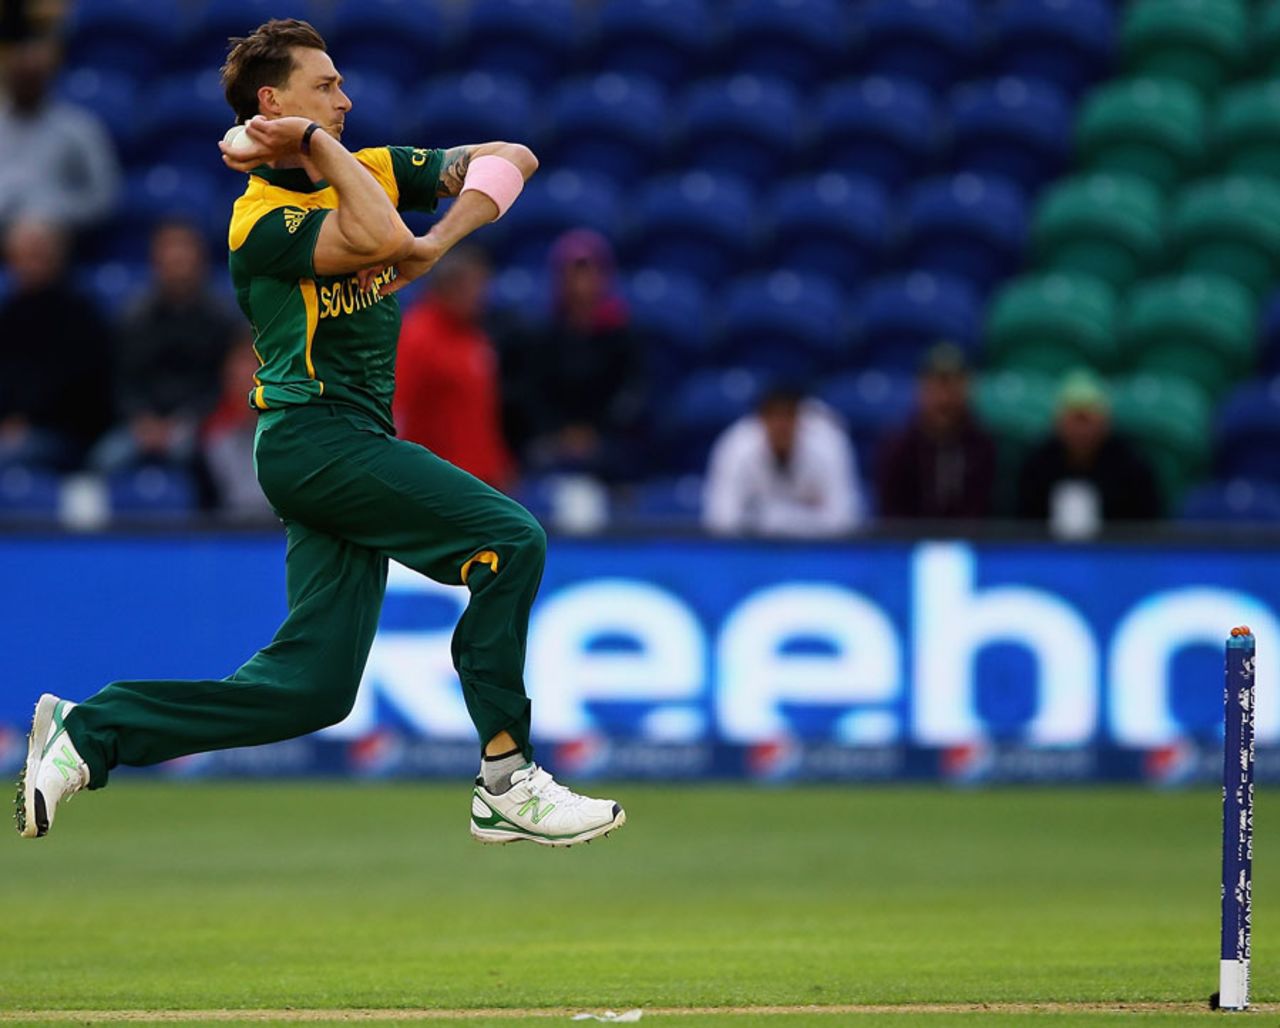 Dale Steyn in his bowling stride, South Africa v West Indies, Champions Trophy, Group B, Cardiff, June 14, 2013